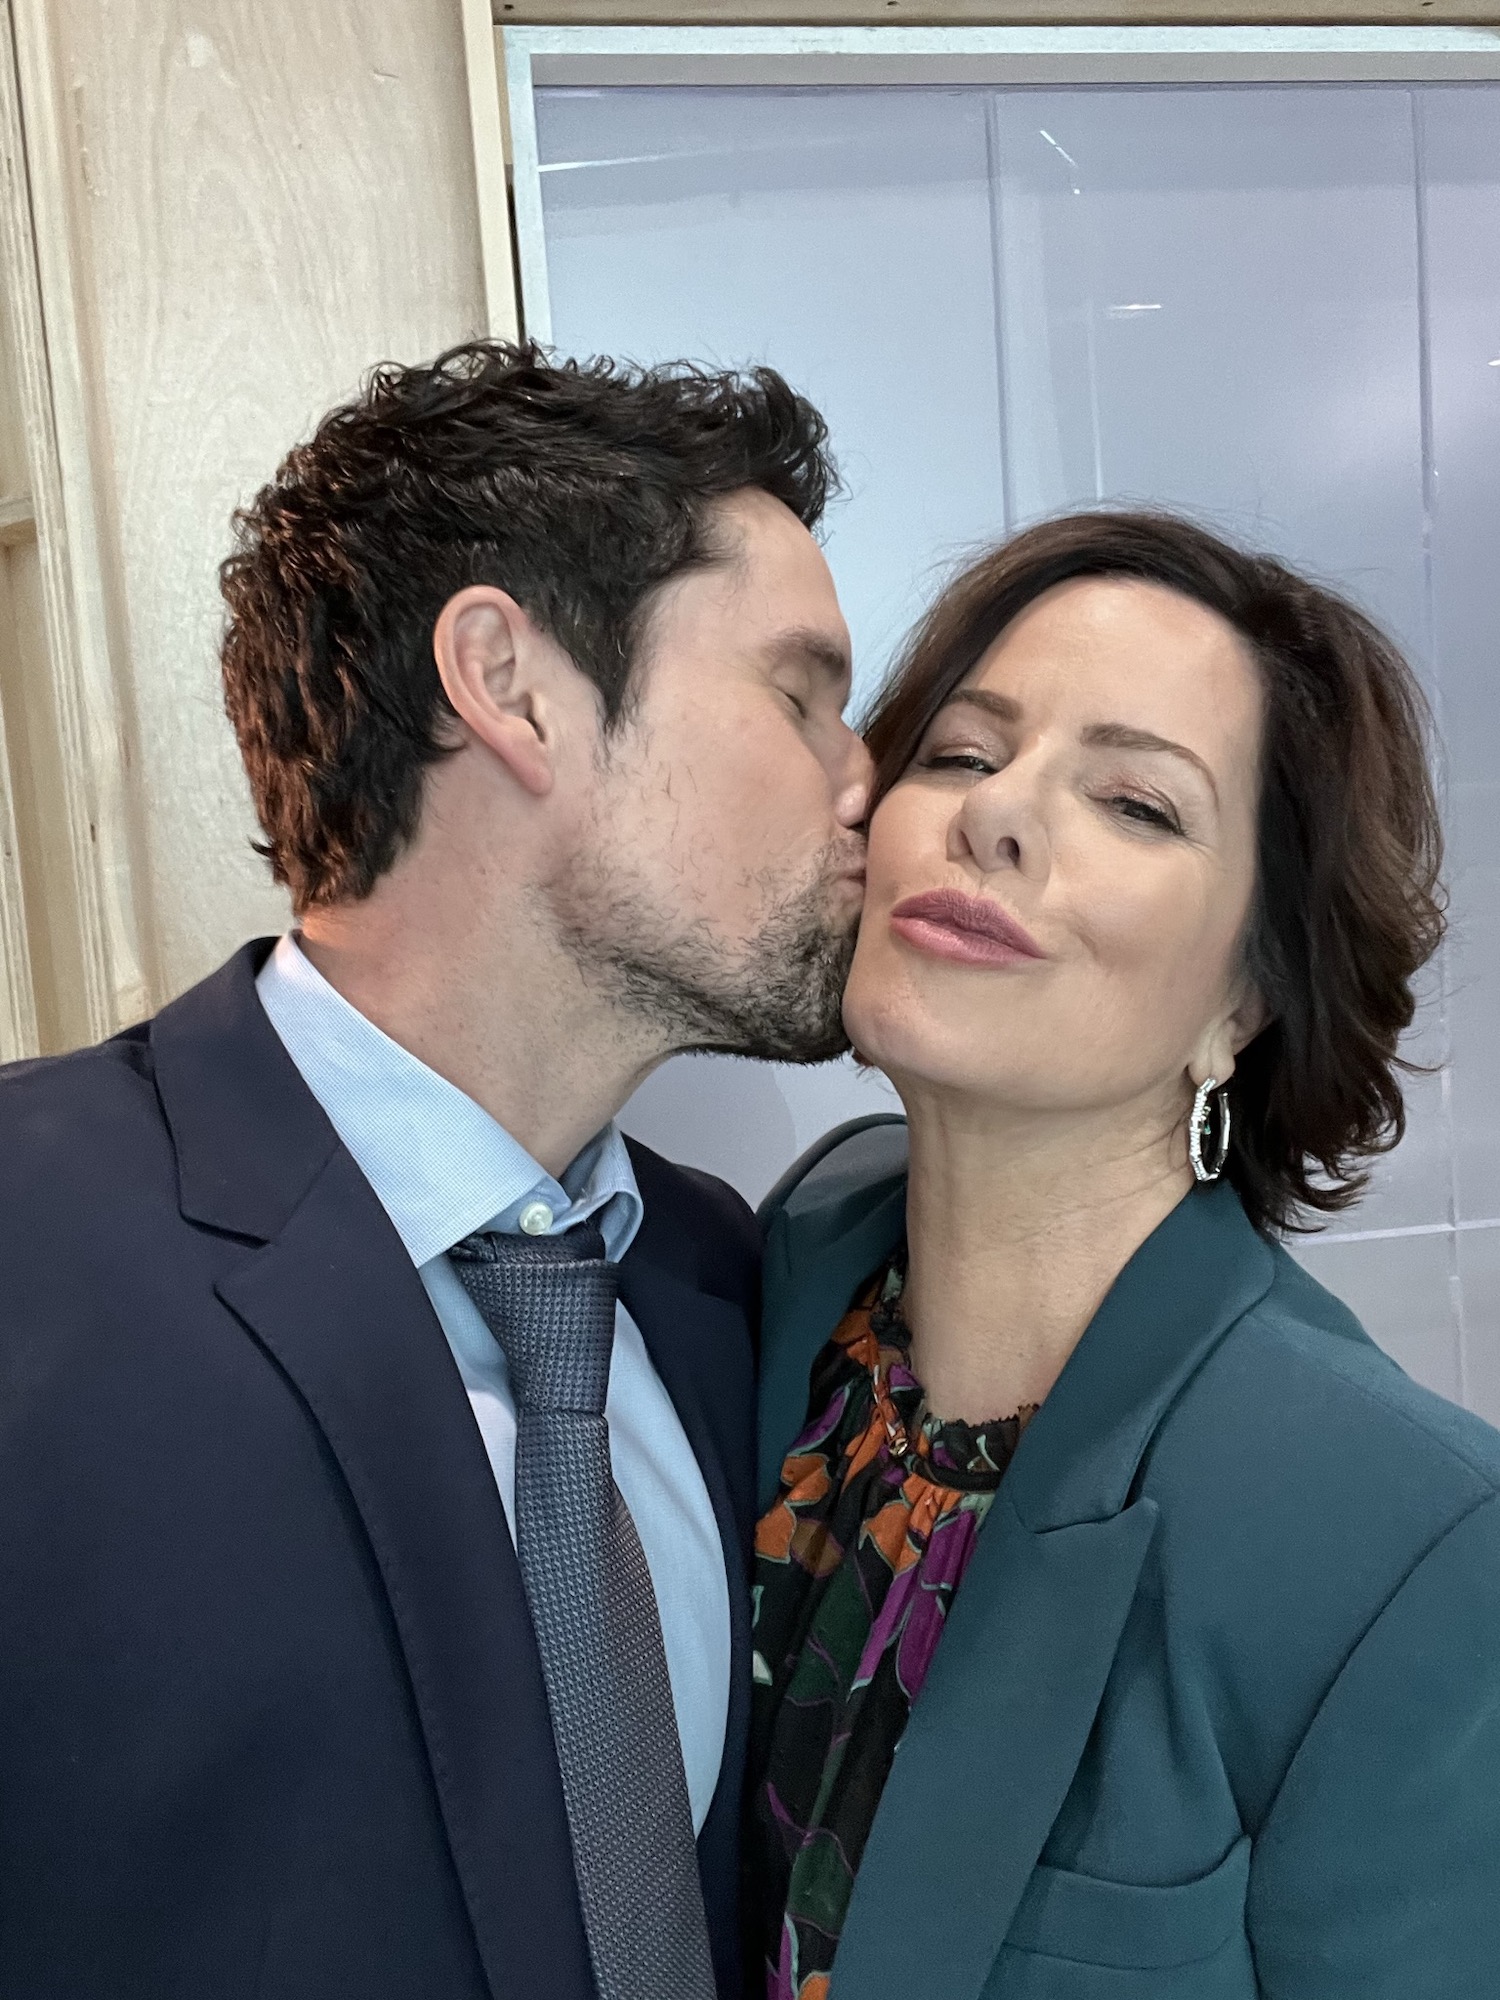 Benjamin Hollingsworth and Marcia Gay Harden on the 'So Help Me Todd' Set